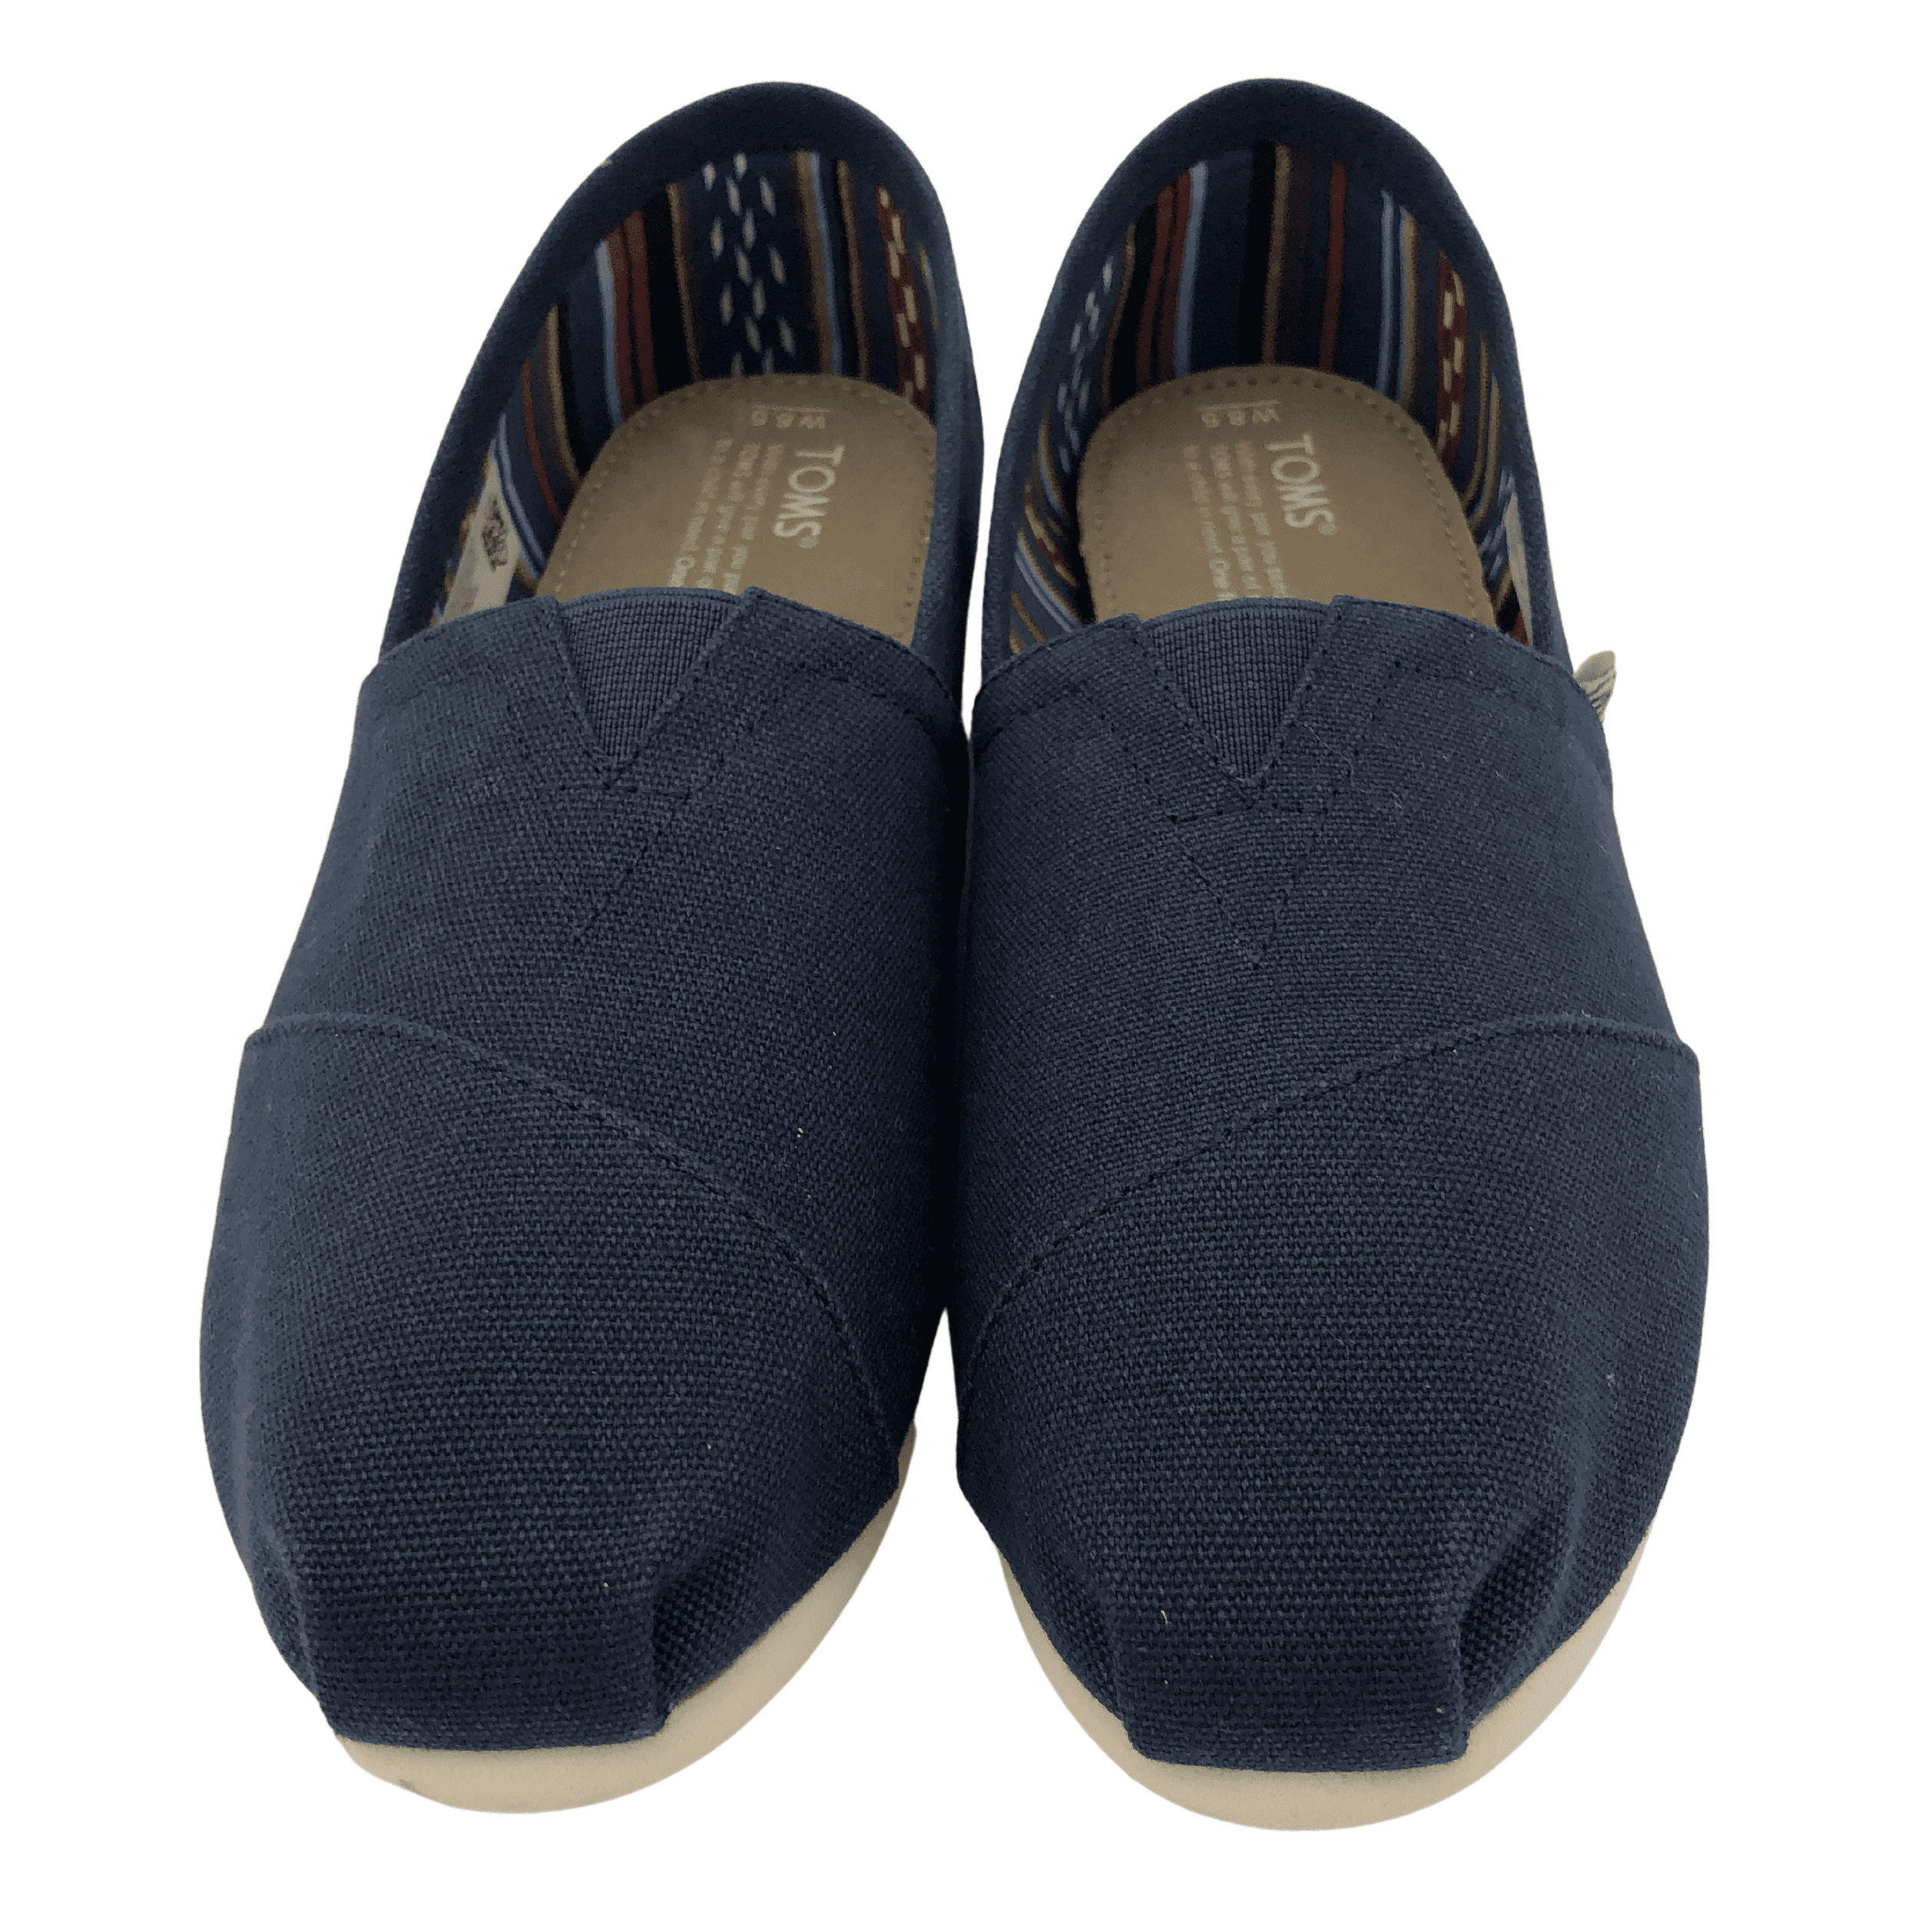 Toms Women's Canvas Shoes: Slip On: Navy Blue: Size 6.5